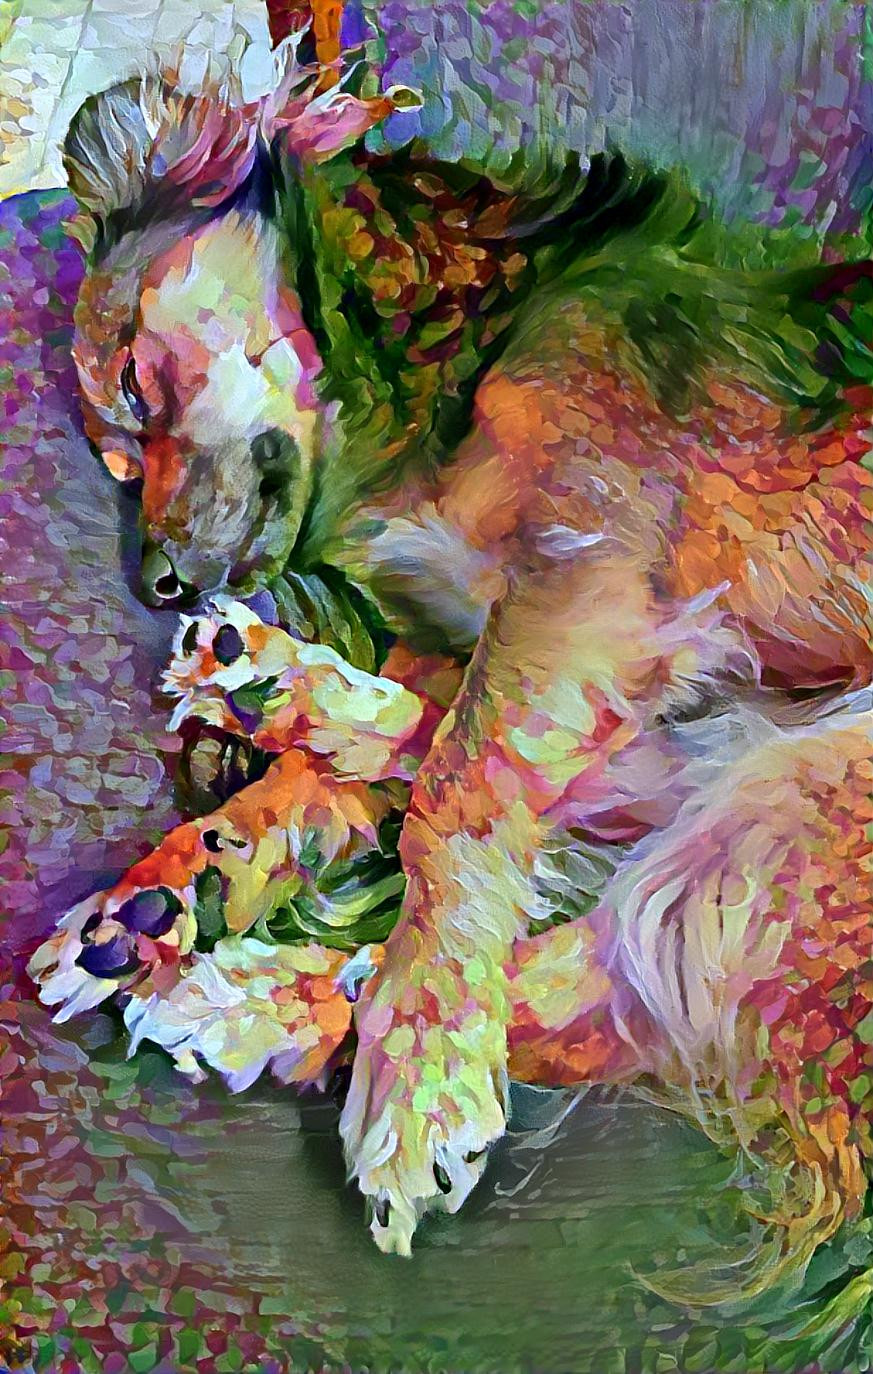 Sleeping dog dreams of running through a Colorful Field of flow(ers)